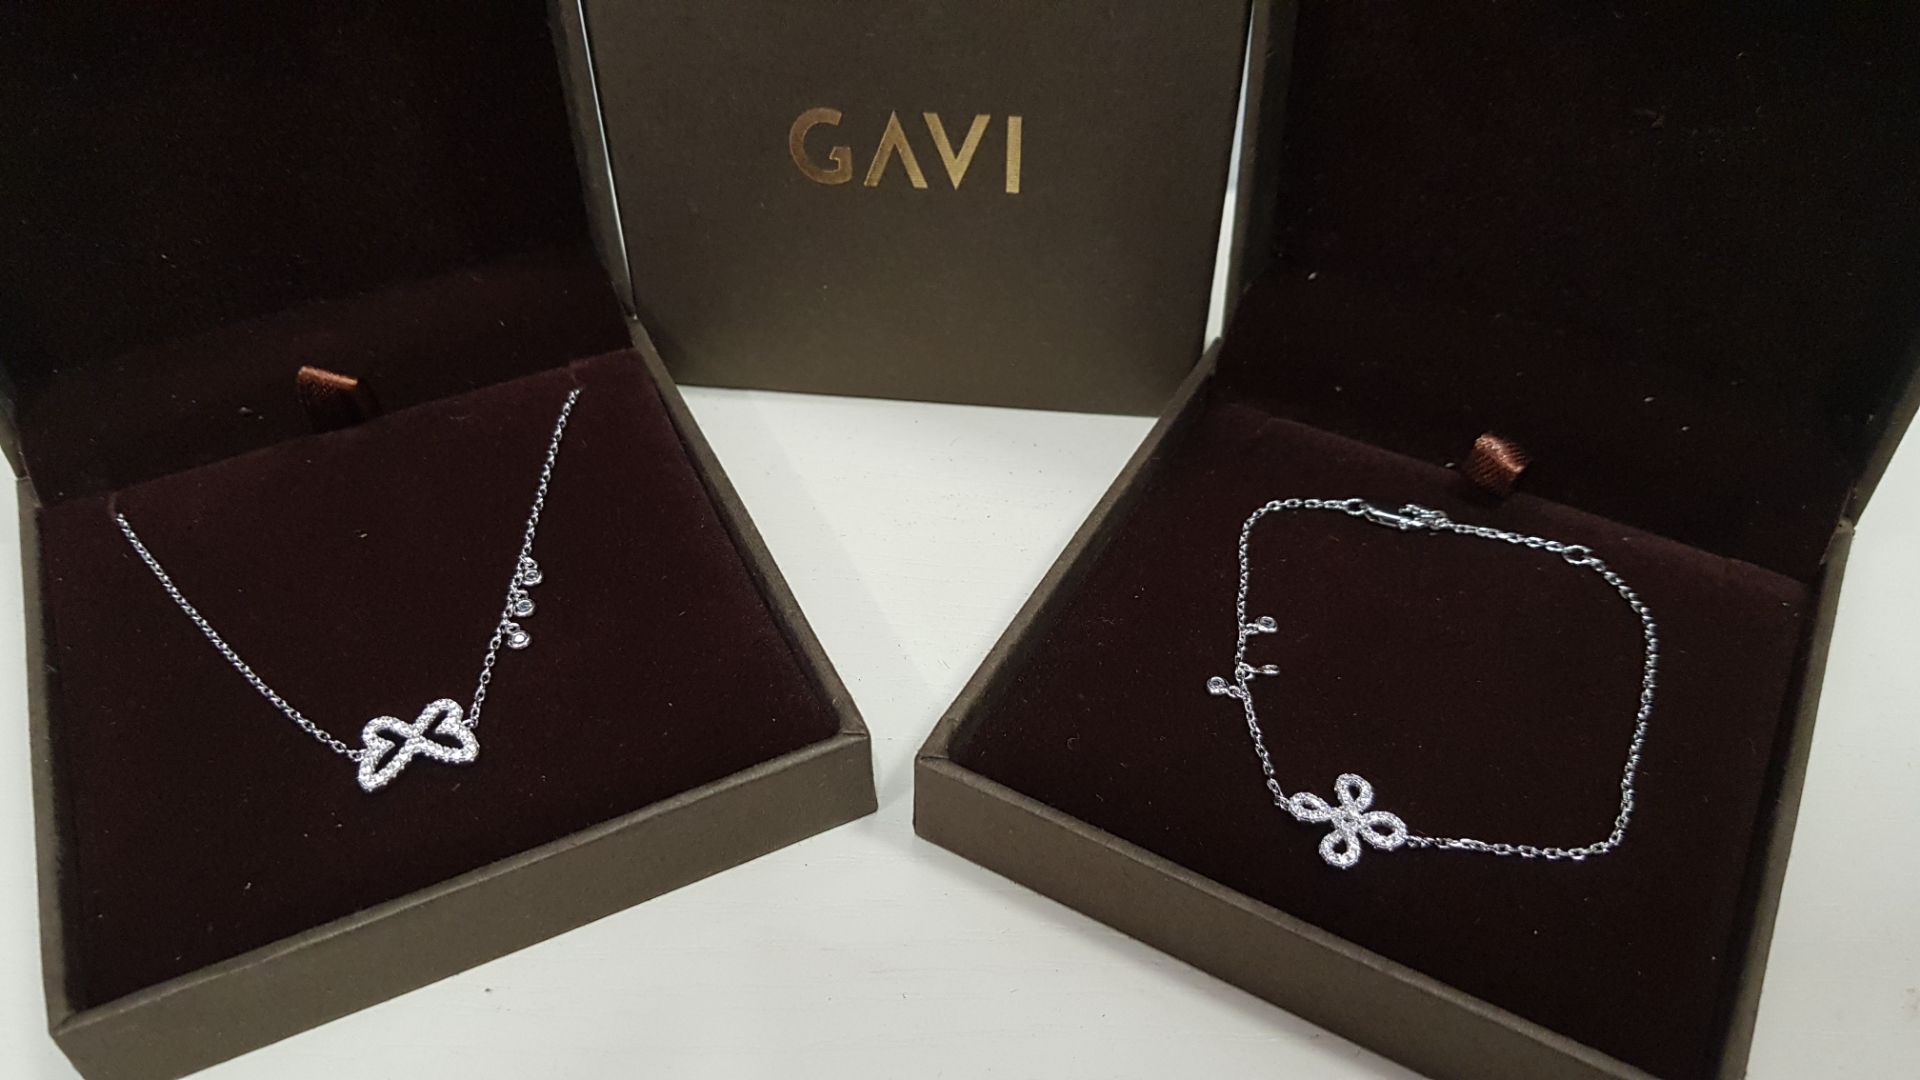 19 X ASSORTED BRAND NEW BOXED GAVI LOT CONTAINING 4 X SILVER COLOURED BRACELET WITH PENDANT AND 15 X